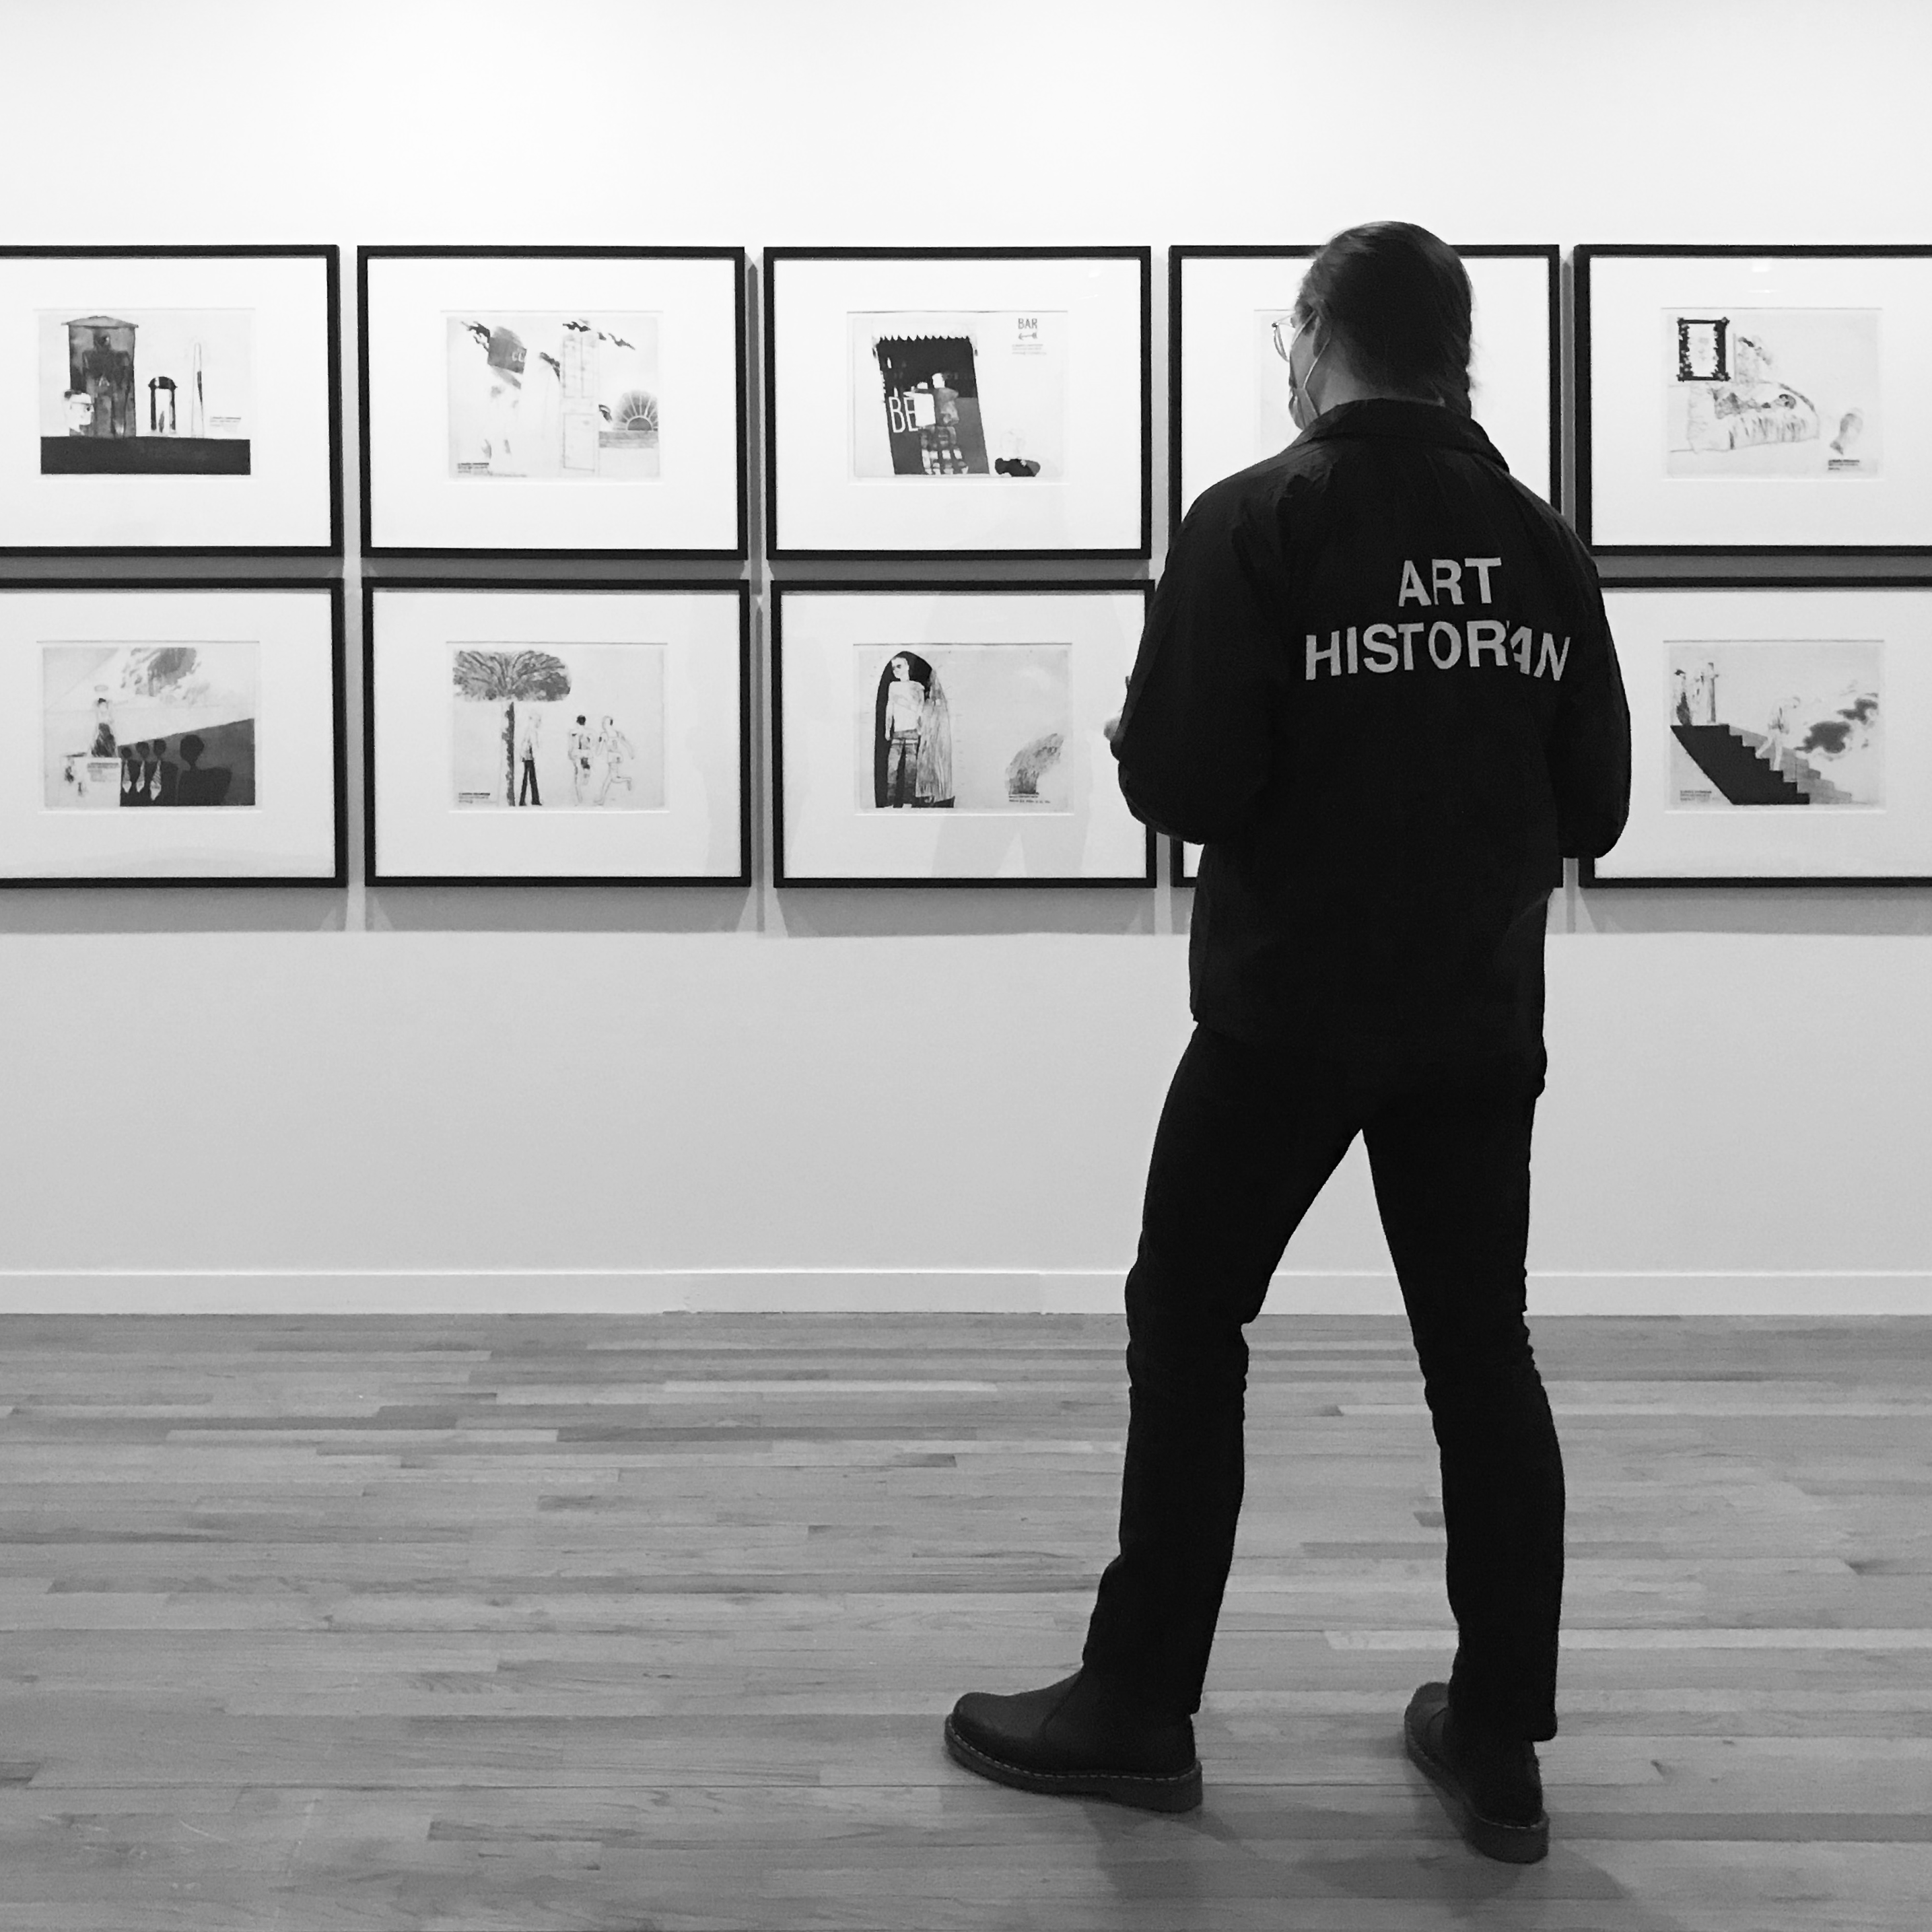 From behind: me wearing the jacket, with 'art historian' visible on the back. I am looking at a series of framed drawings on a gallery wall, and wearing black pants and black boots that match the jacket.